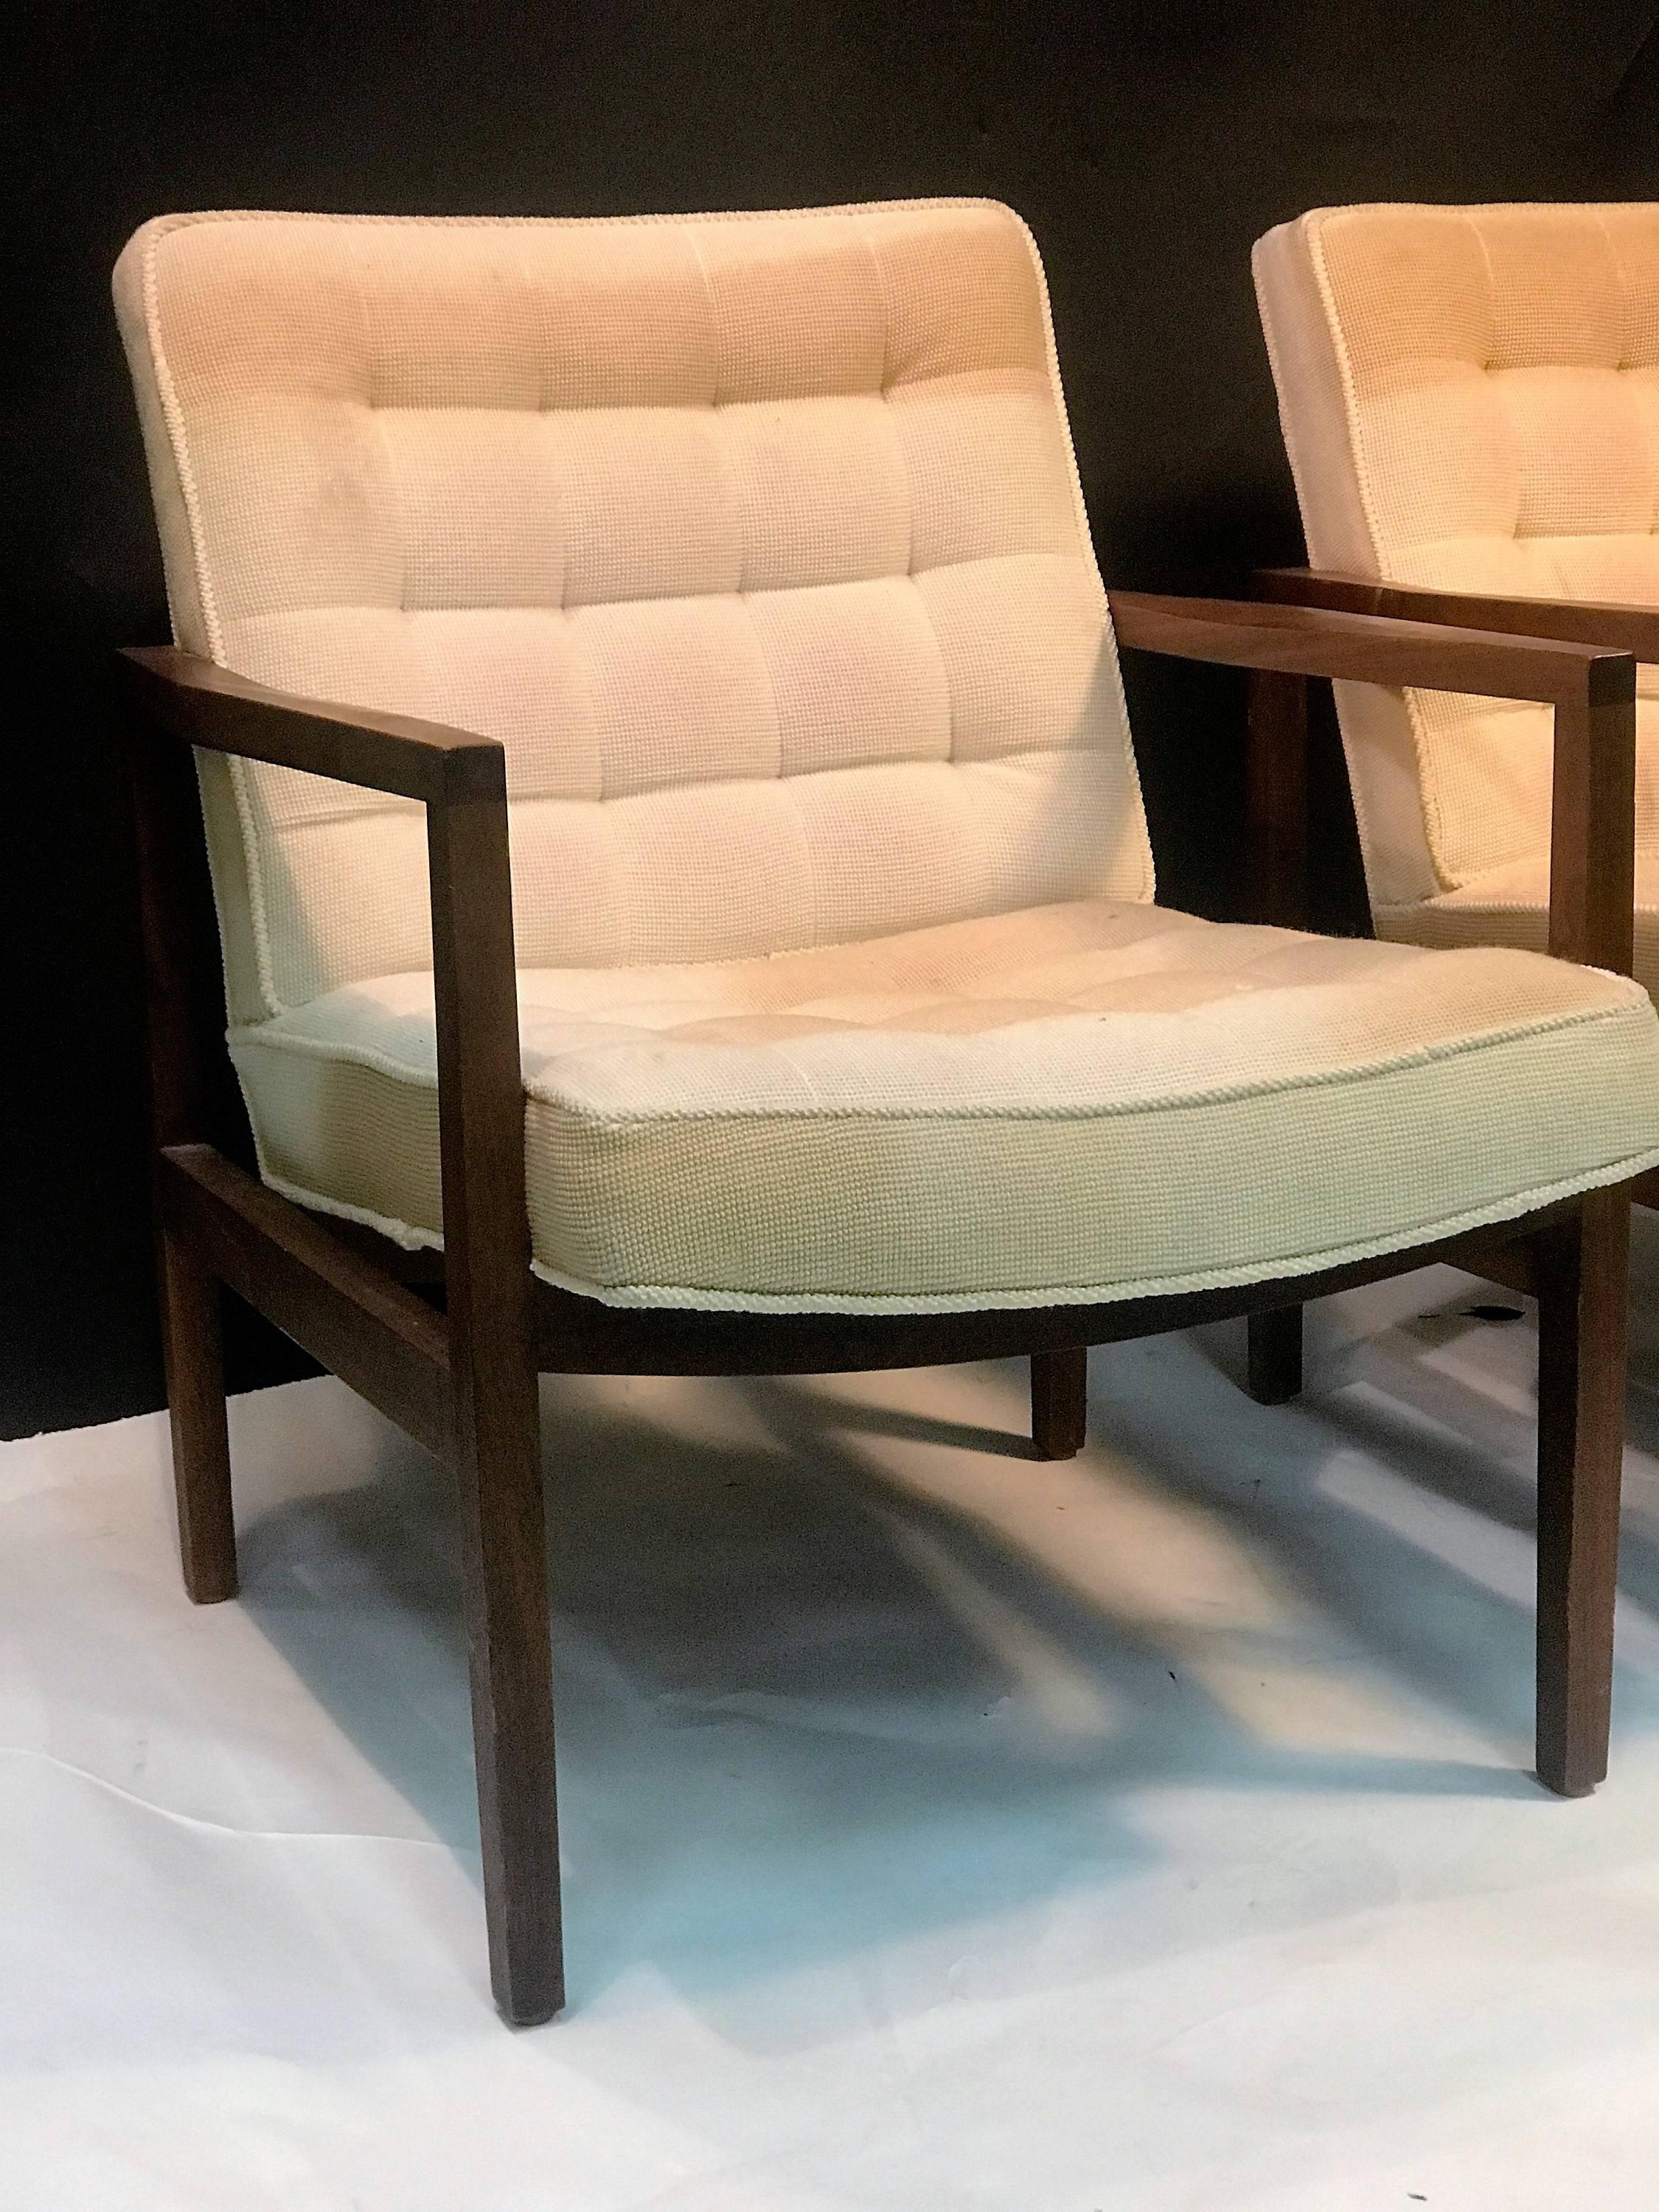 Pair of beautiful sculpted wood armchairs with original cream tufted fabric backs and seats. Great Mid-Century design attributed to Edward Wormley for Dunbar.